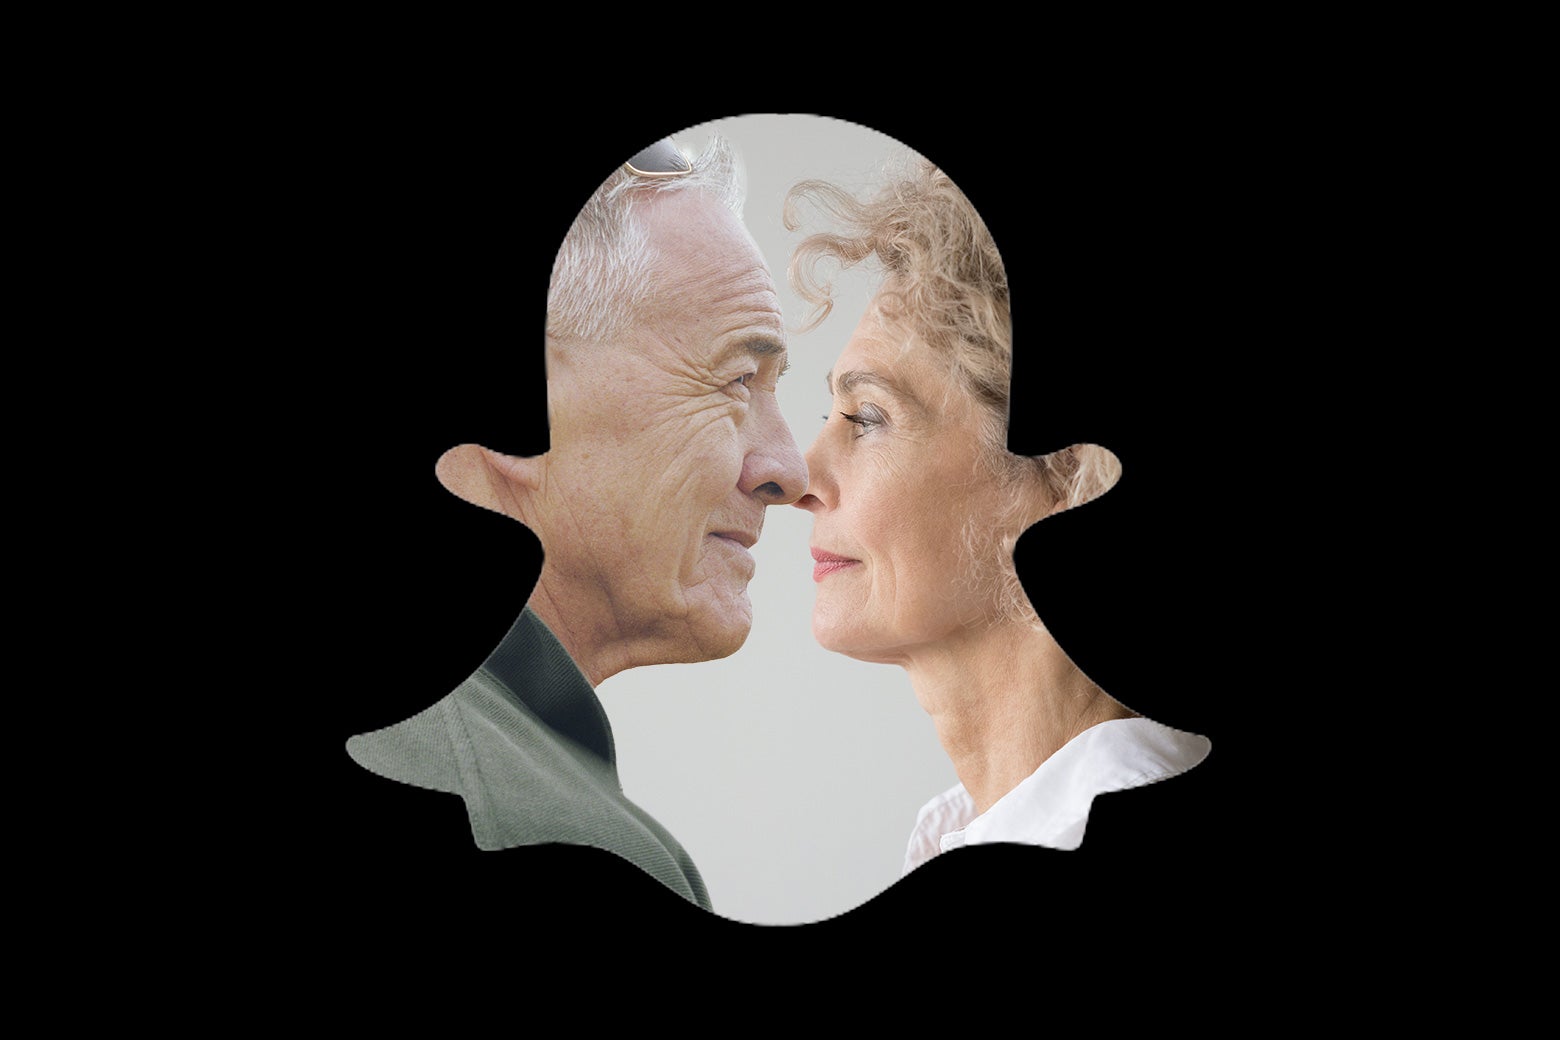 A Snapchat ghost icon hovers over an image of an older man and woman, presumably deceased parents.